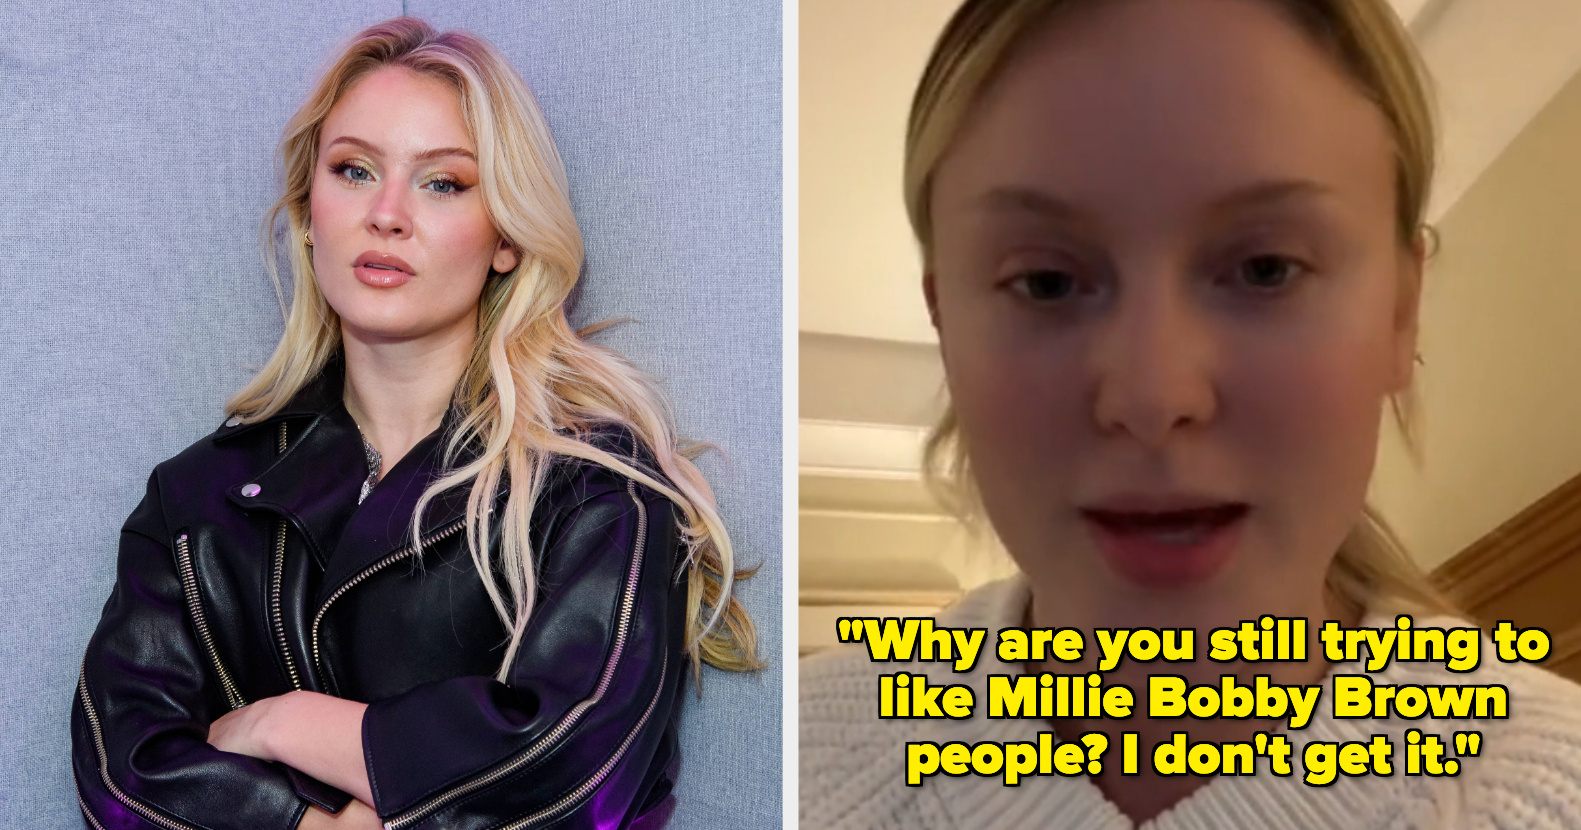 Zara Larsson Calls Out TikToker Who Joked About Her Being Homophobic